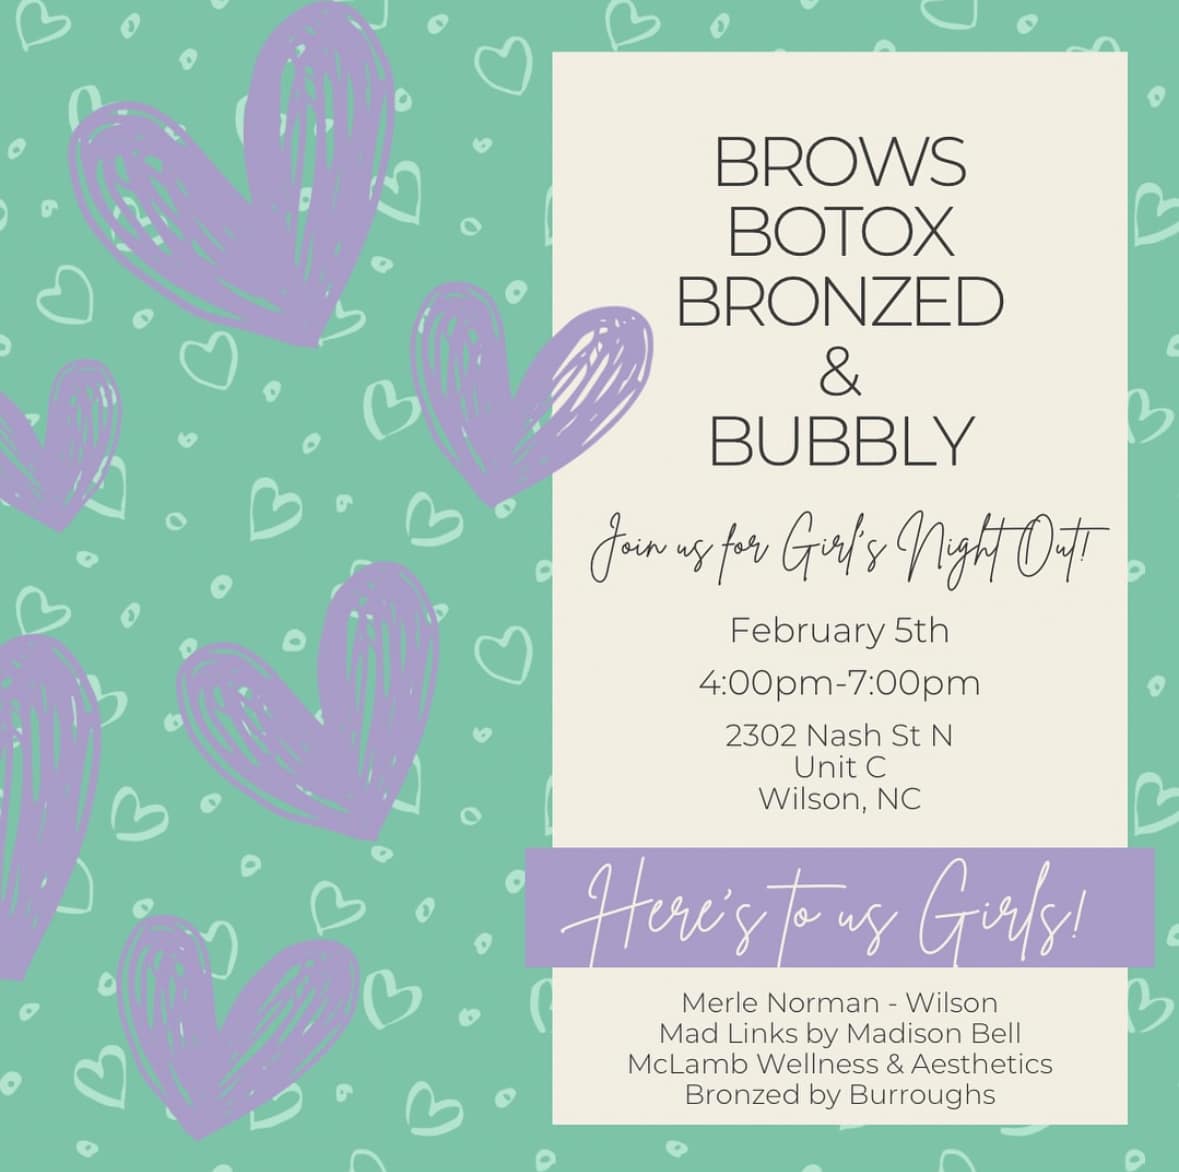 Event Botox Bronzed and Bubbly